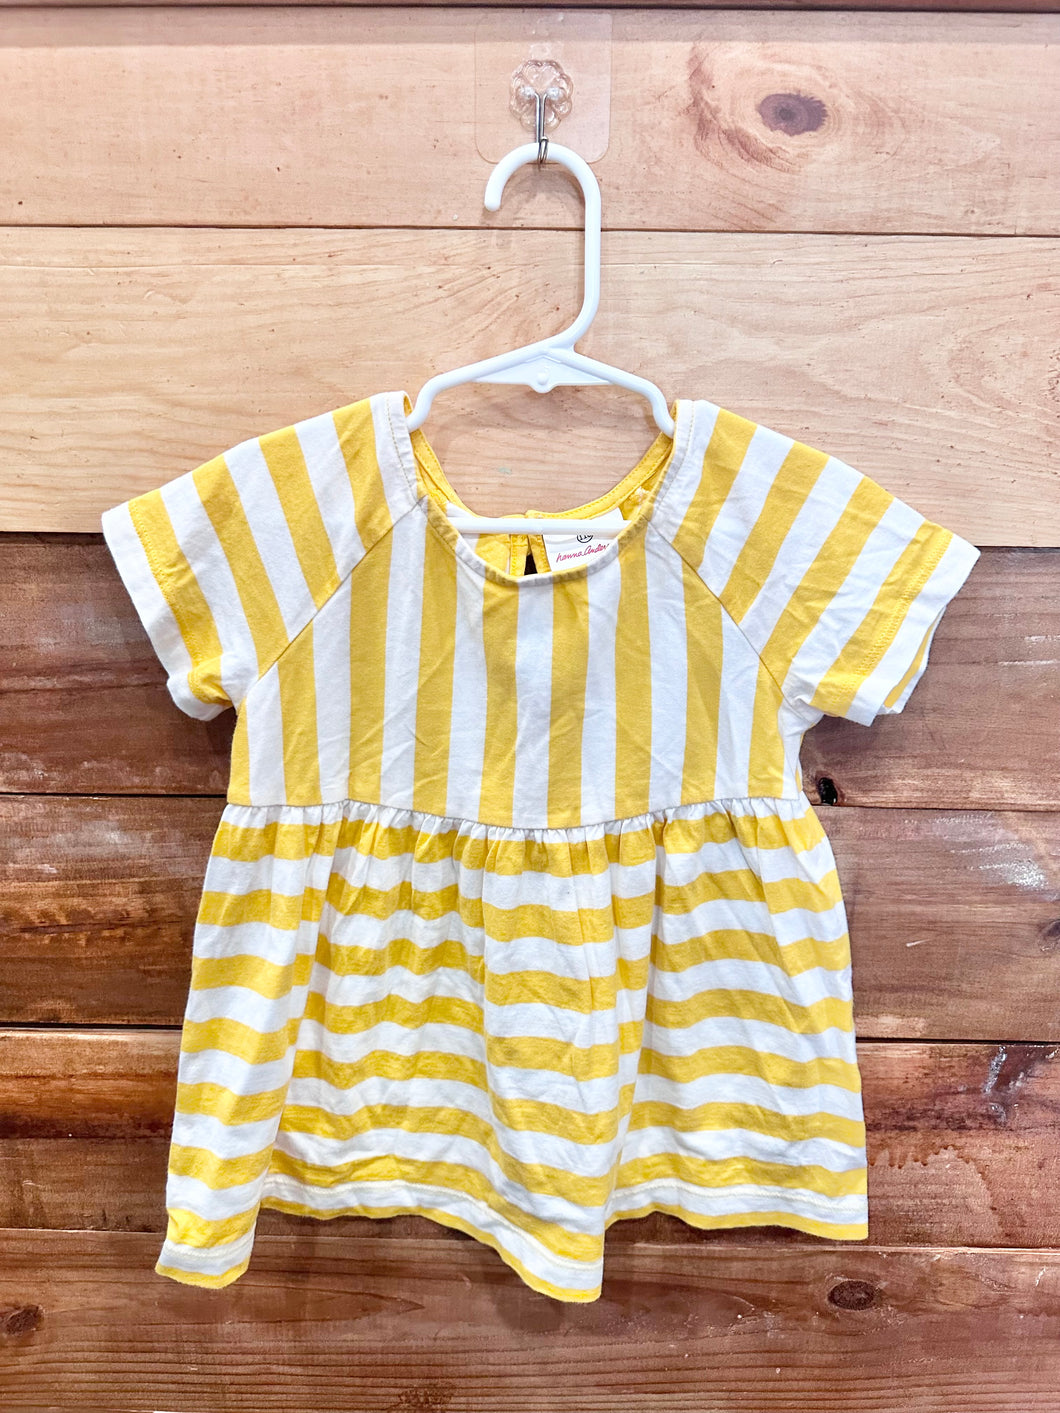 Hanna Andersson Yellow Striped Top Size 5